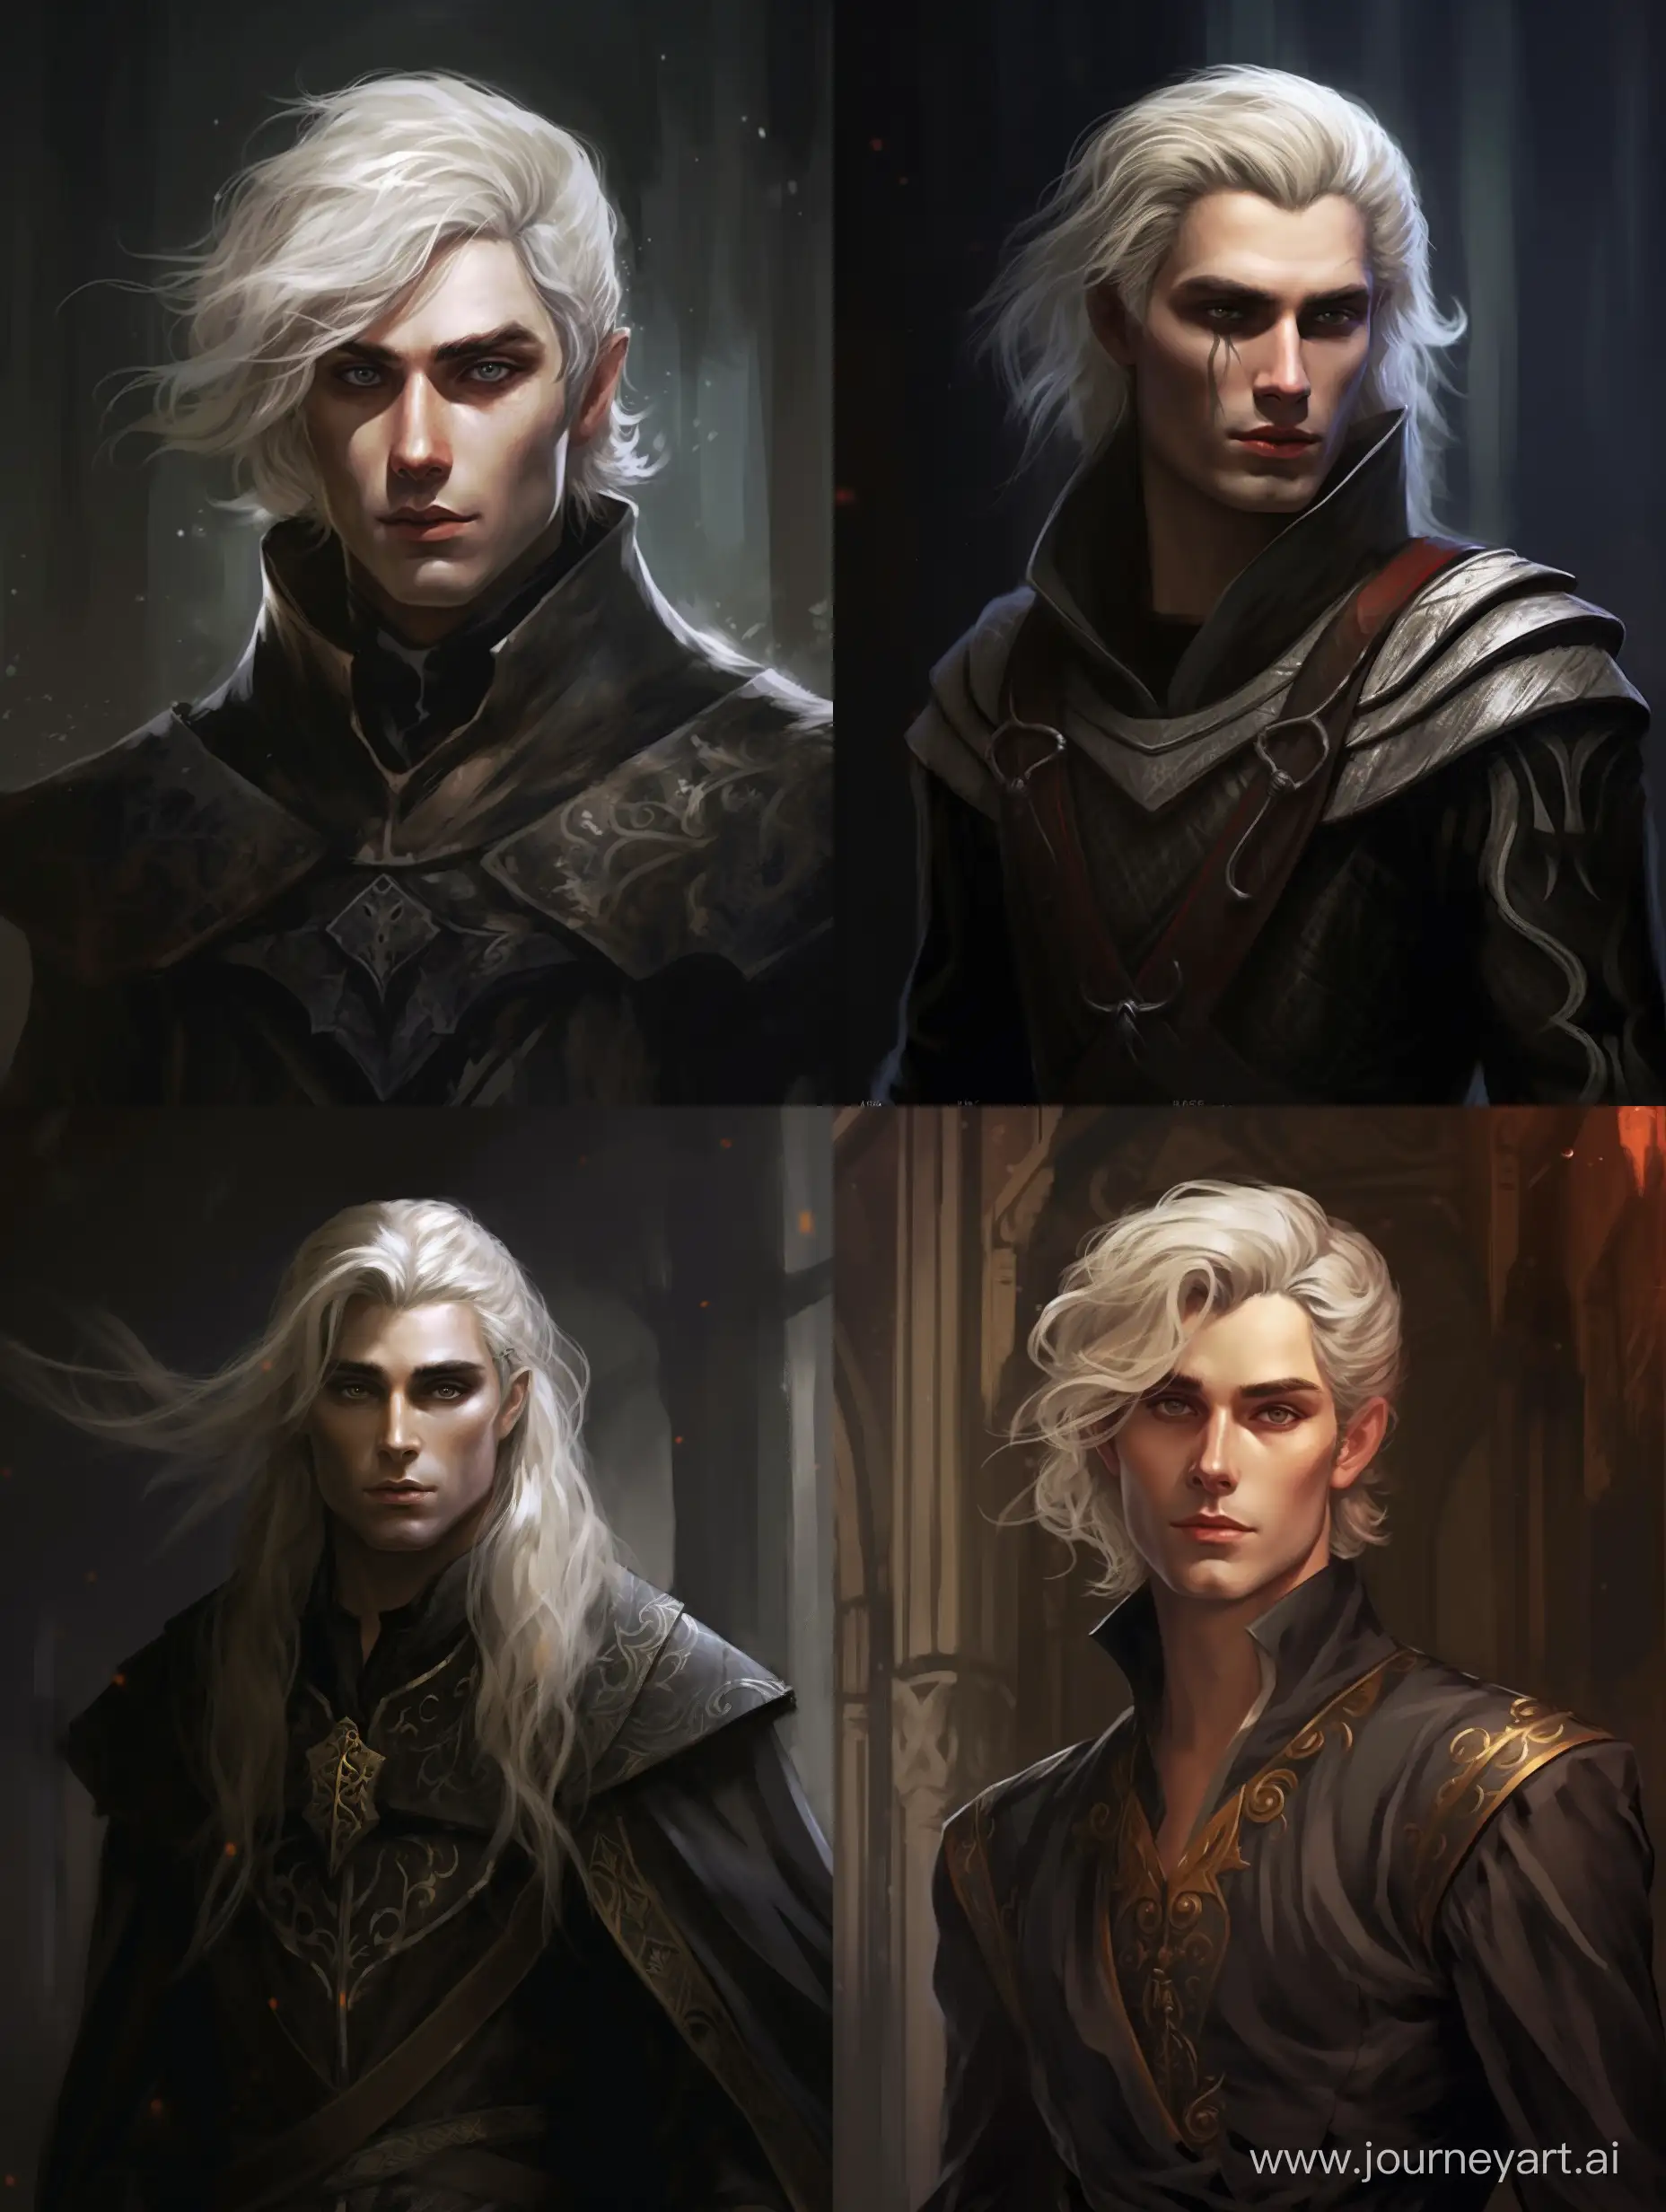 Mysterious-Male-Elf-Wizard-with-Blonde-Hair-and-Intense-Black-Eyes